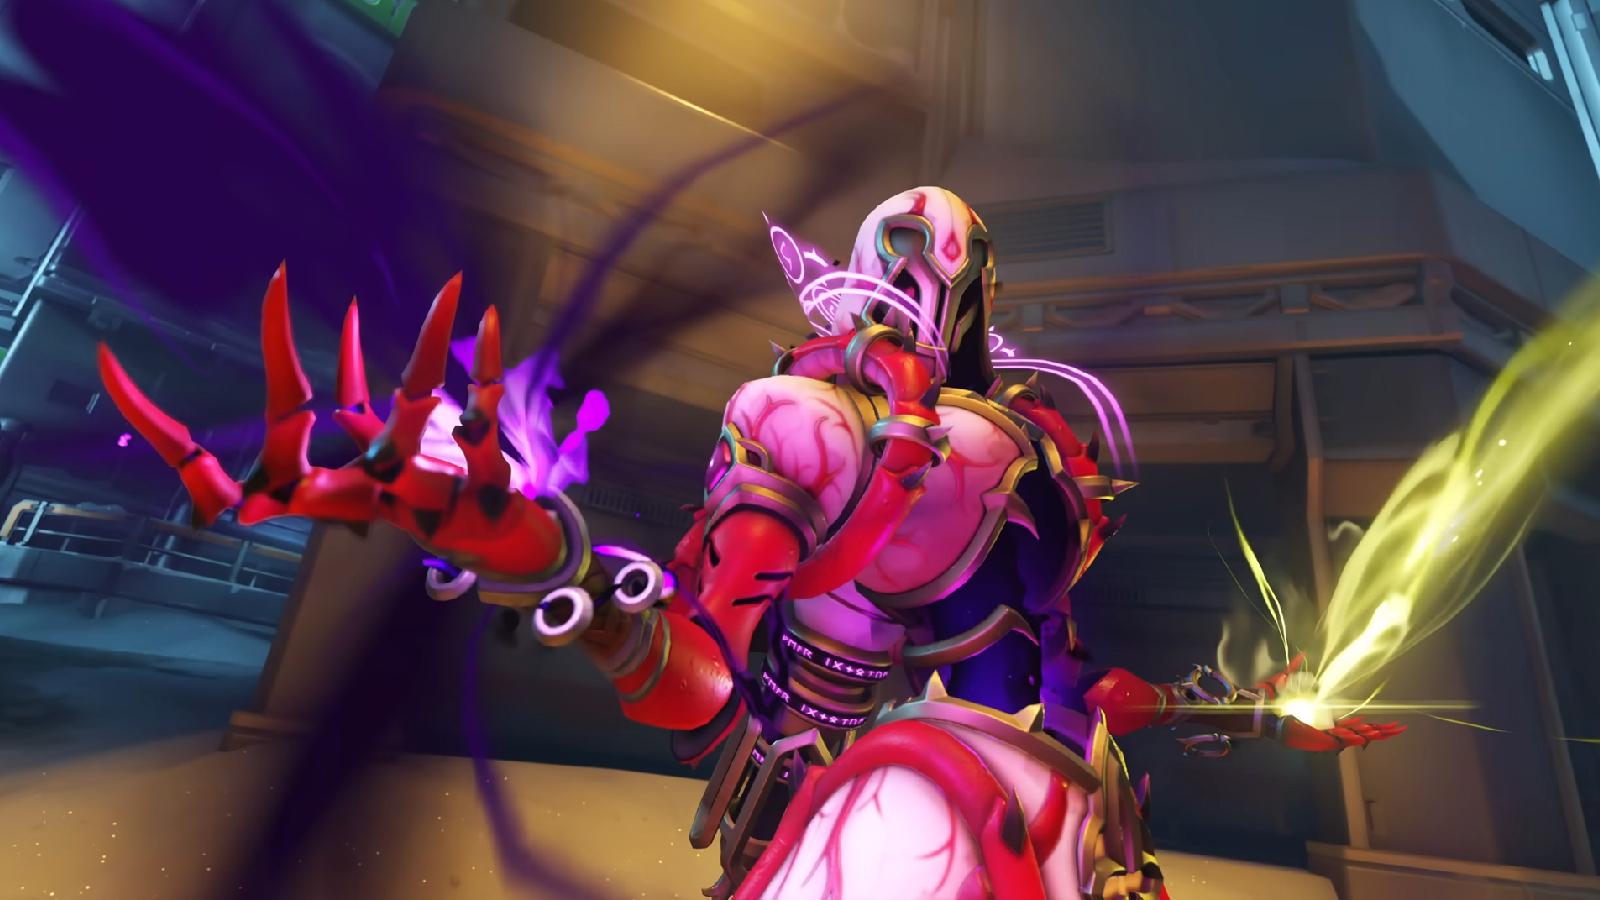 Moira will be recieving the new Mythic skin in Overwatch 2